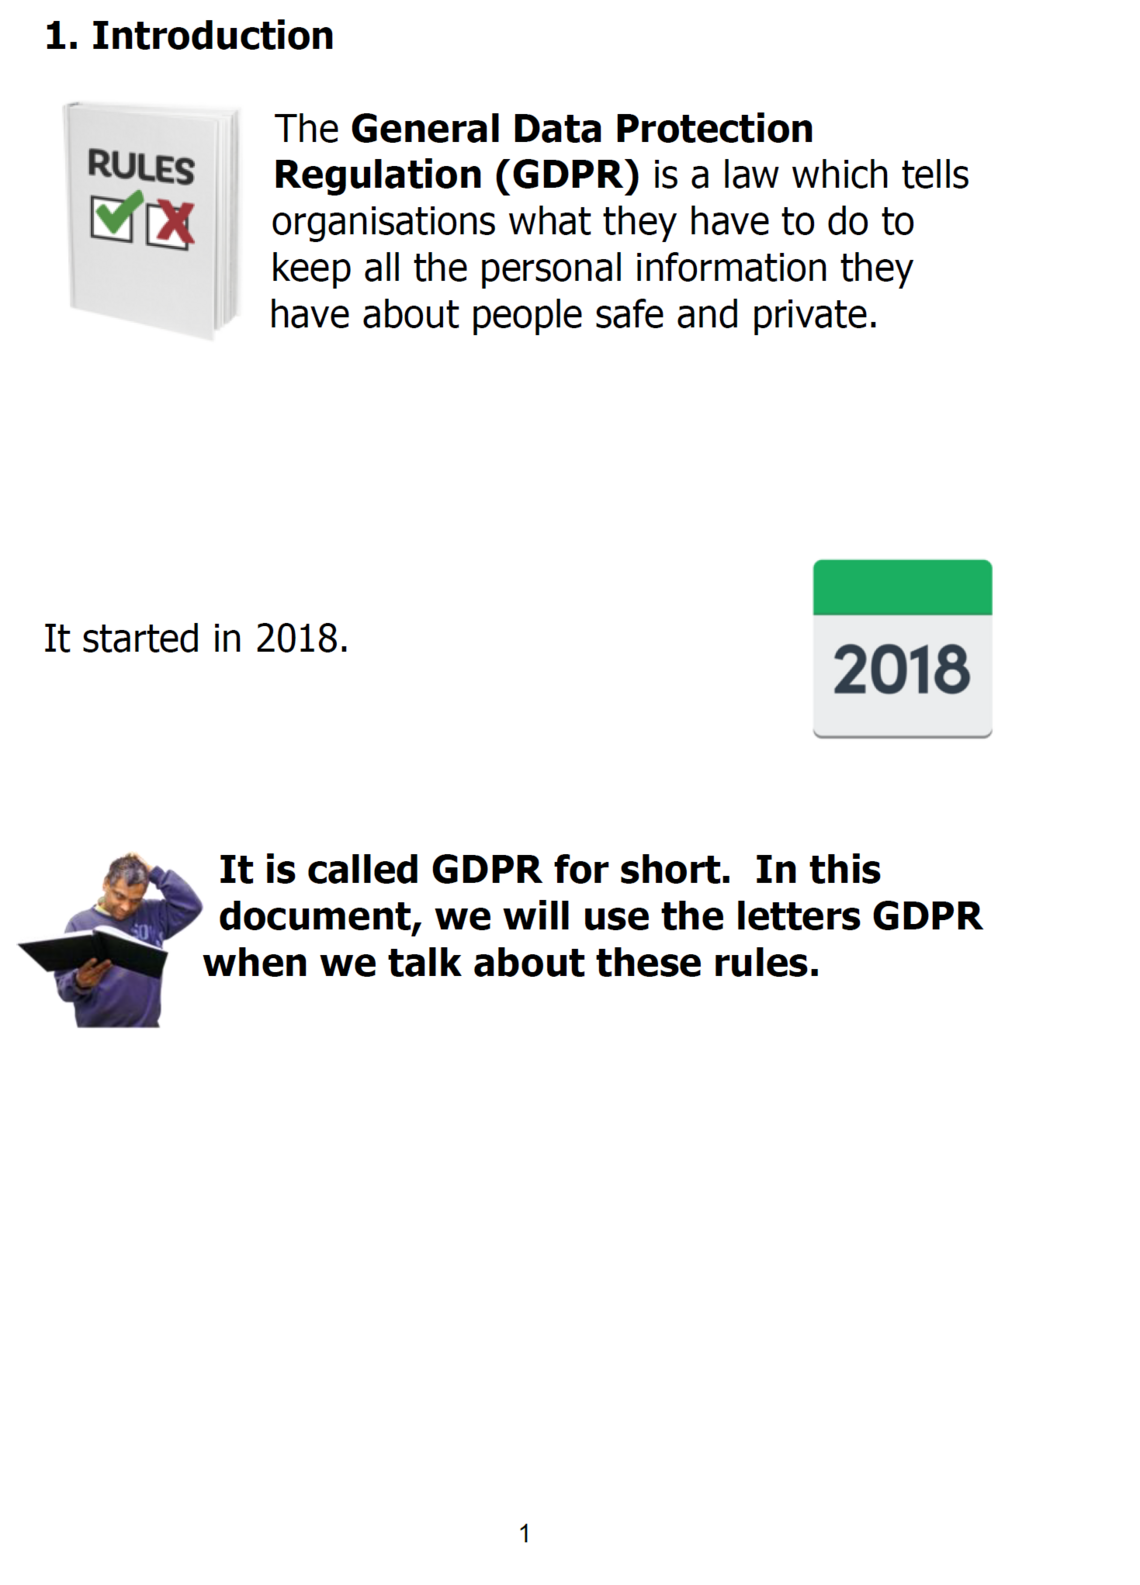 1. Introduction   The General Data Protection Regulation (GDPR) is a law which tells organisations what they have to do to keep all the personal information they have about people safe and private.It started in 2018.It is called GDPR for short.  In this document, we will use the letters GDPR when we talk about these rules. 